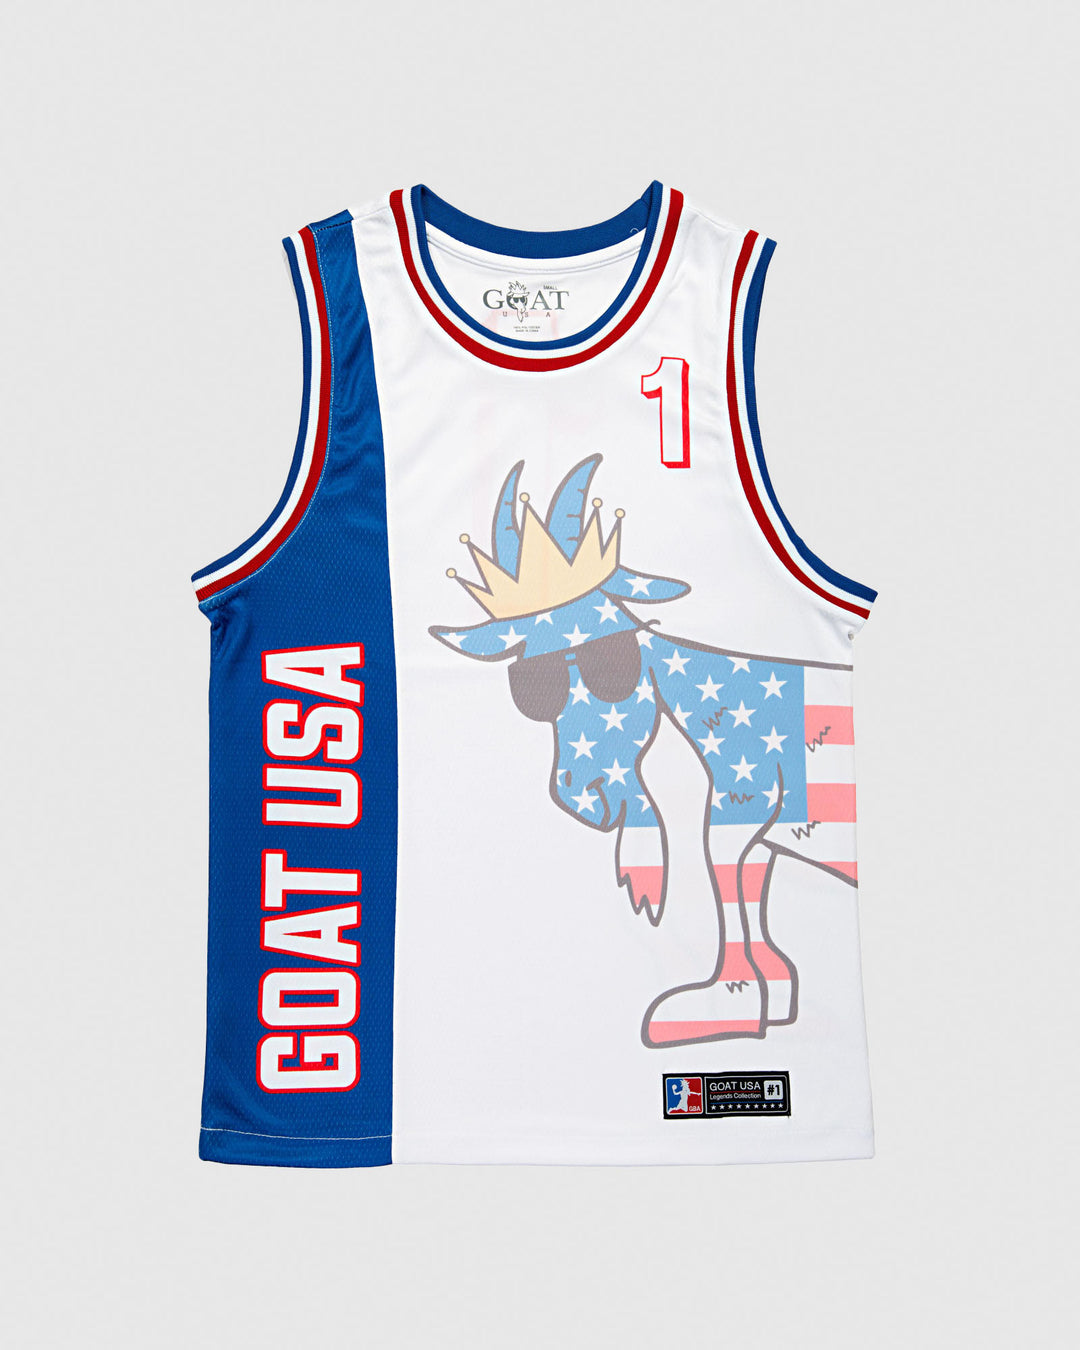 Red, white and blue jersey with large American flag goat that wraps around